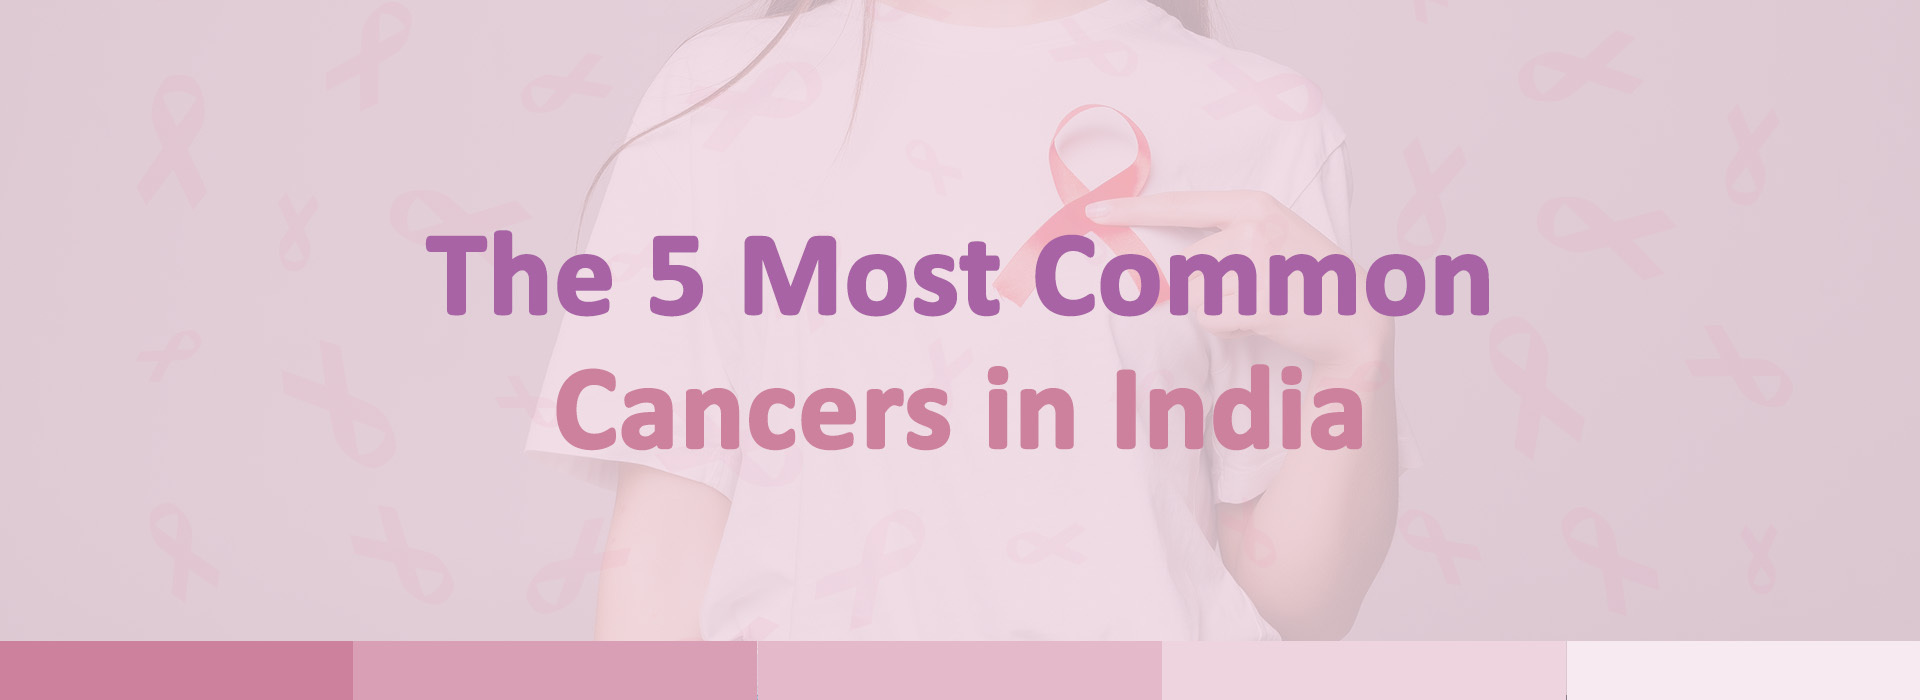 The 5 Most Common Cancers in India